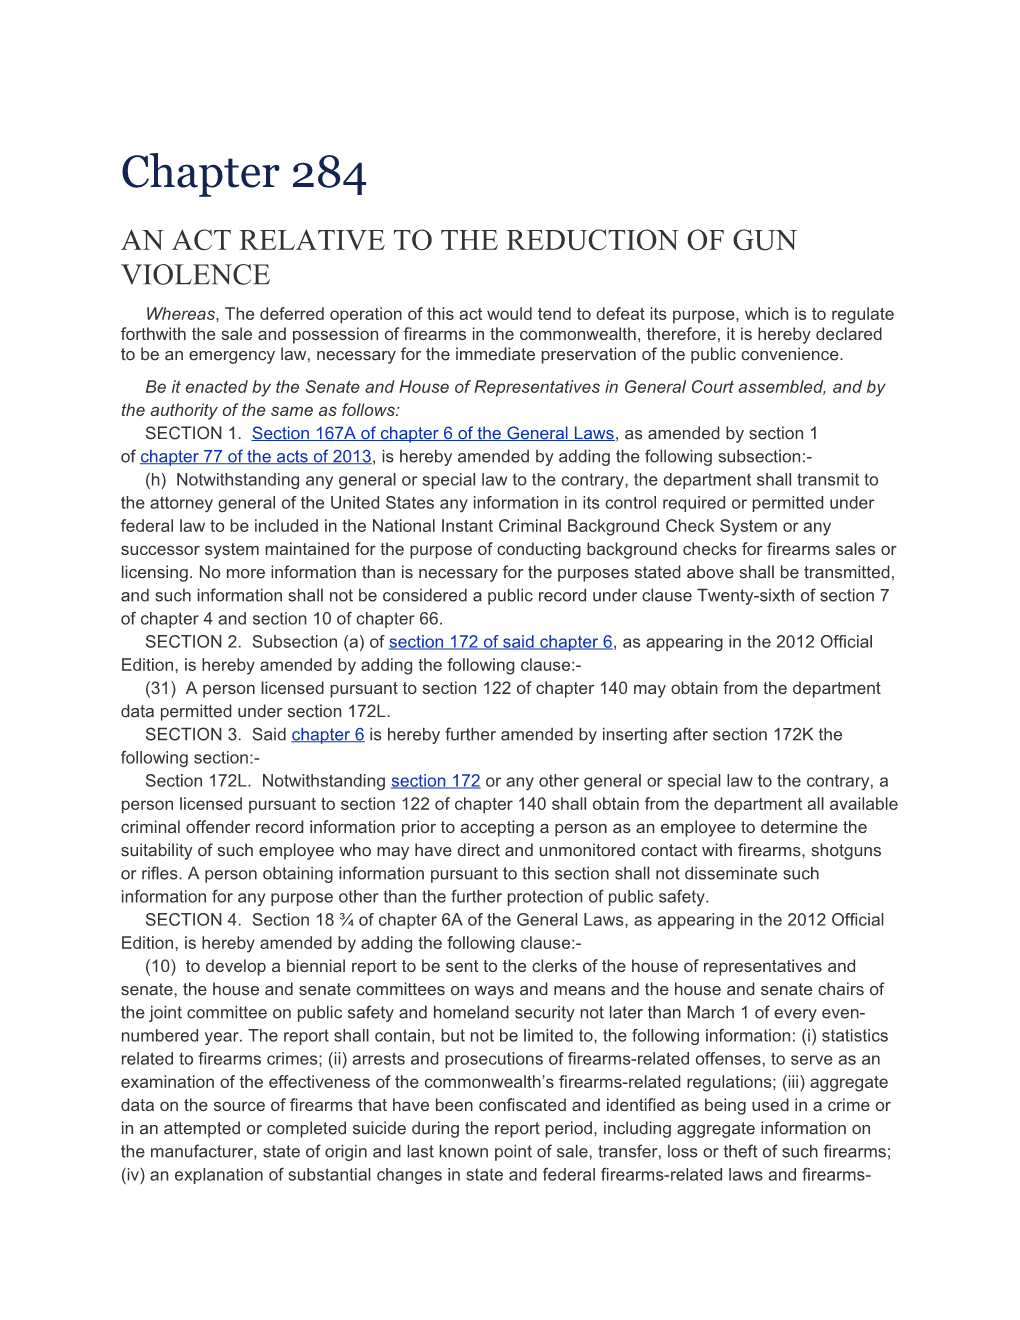 An Act Relative to the Reduction of Gun Violence